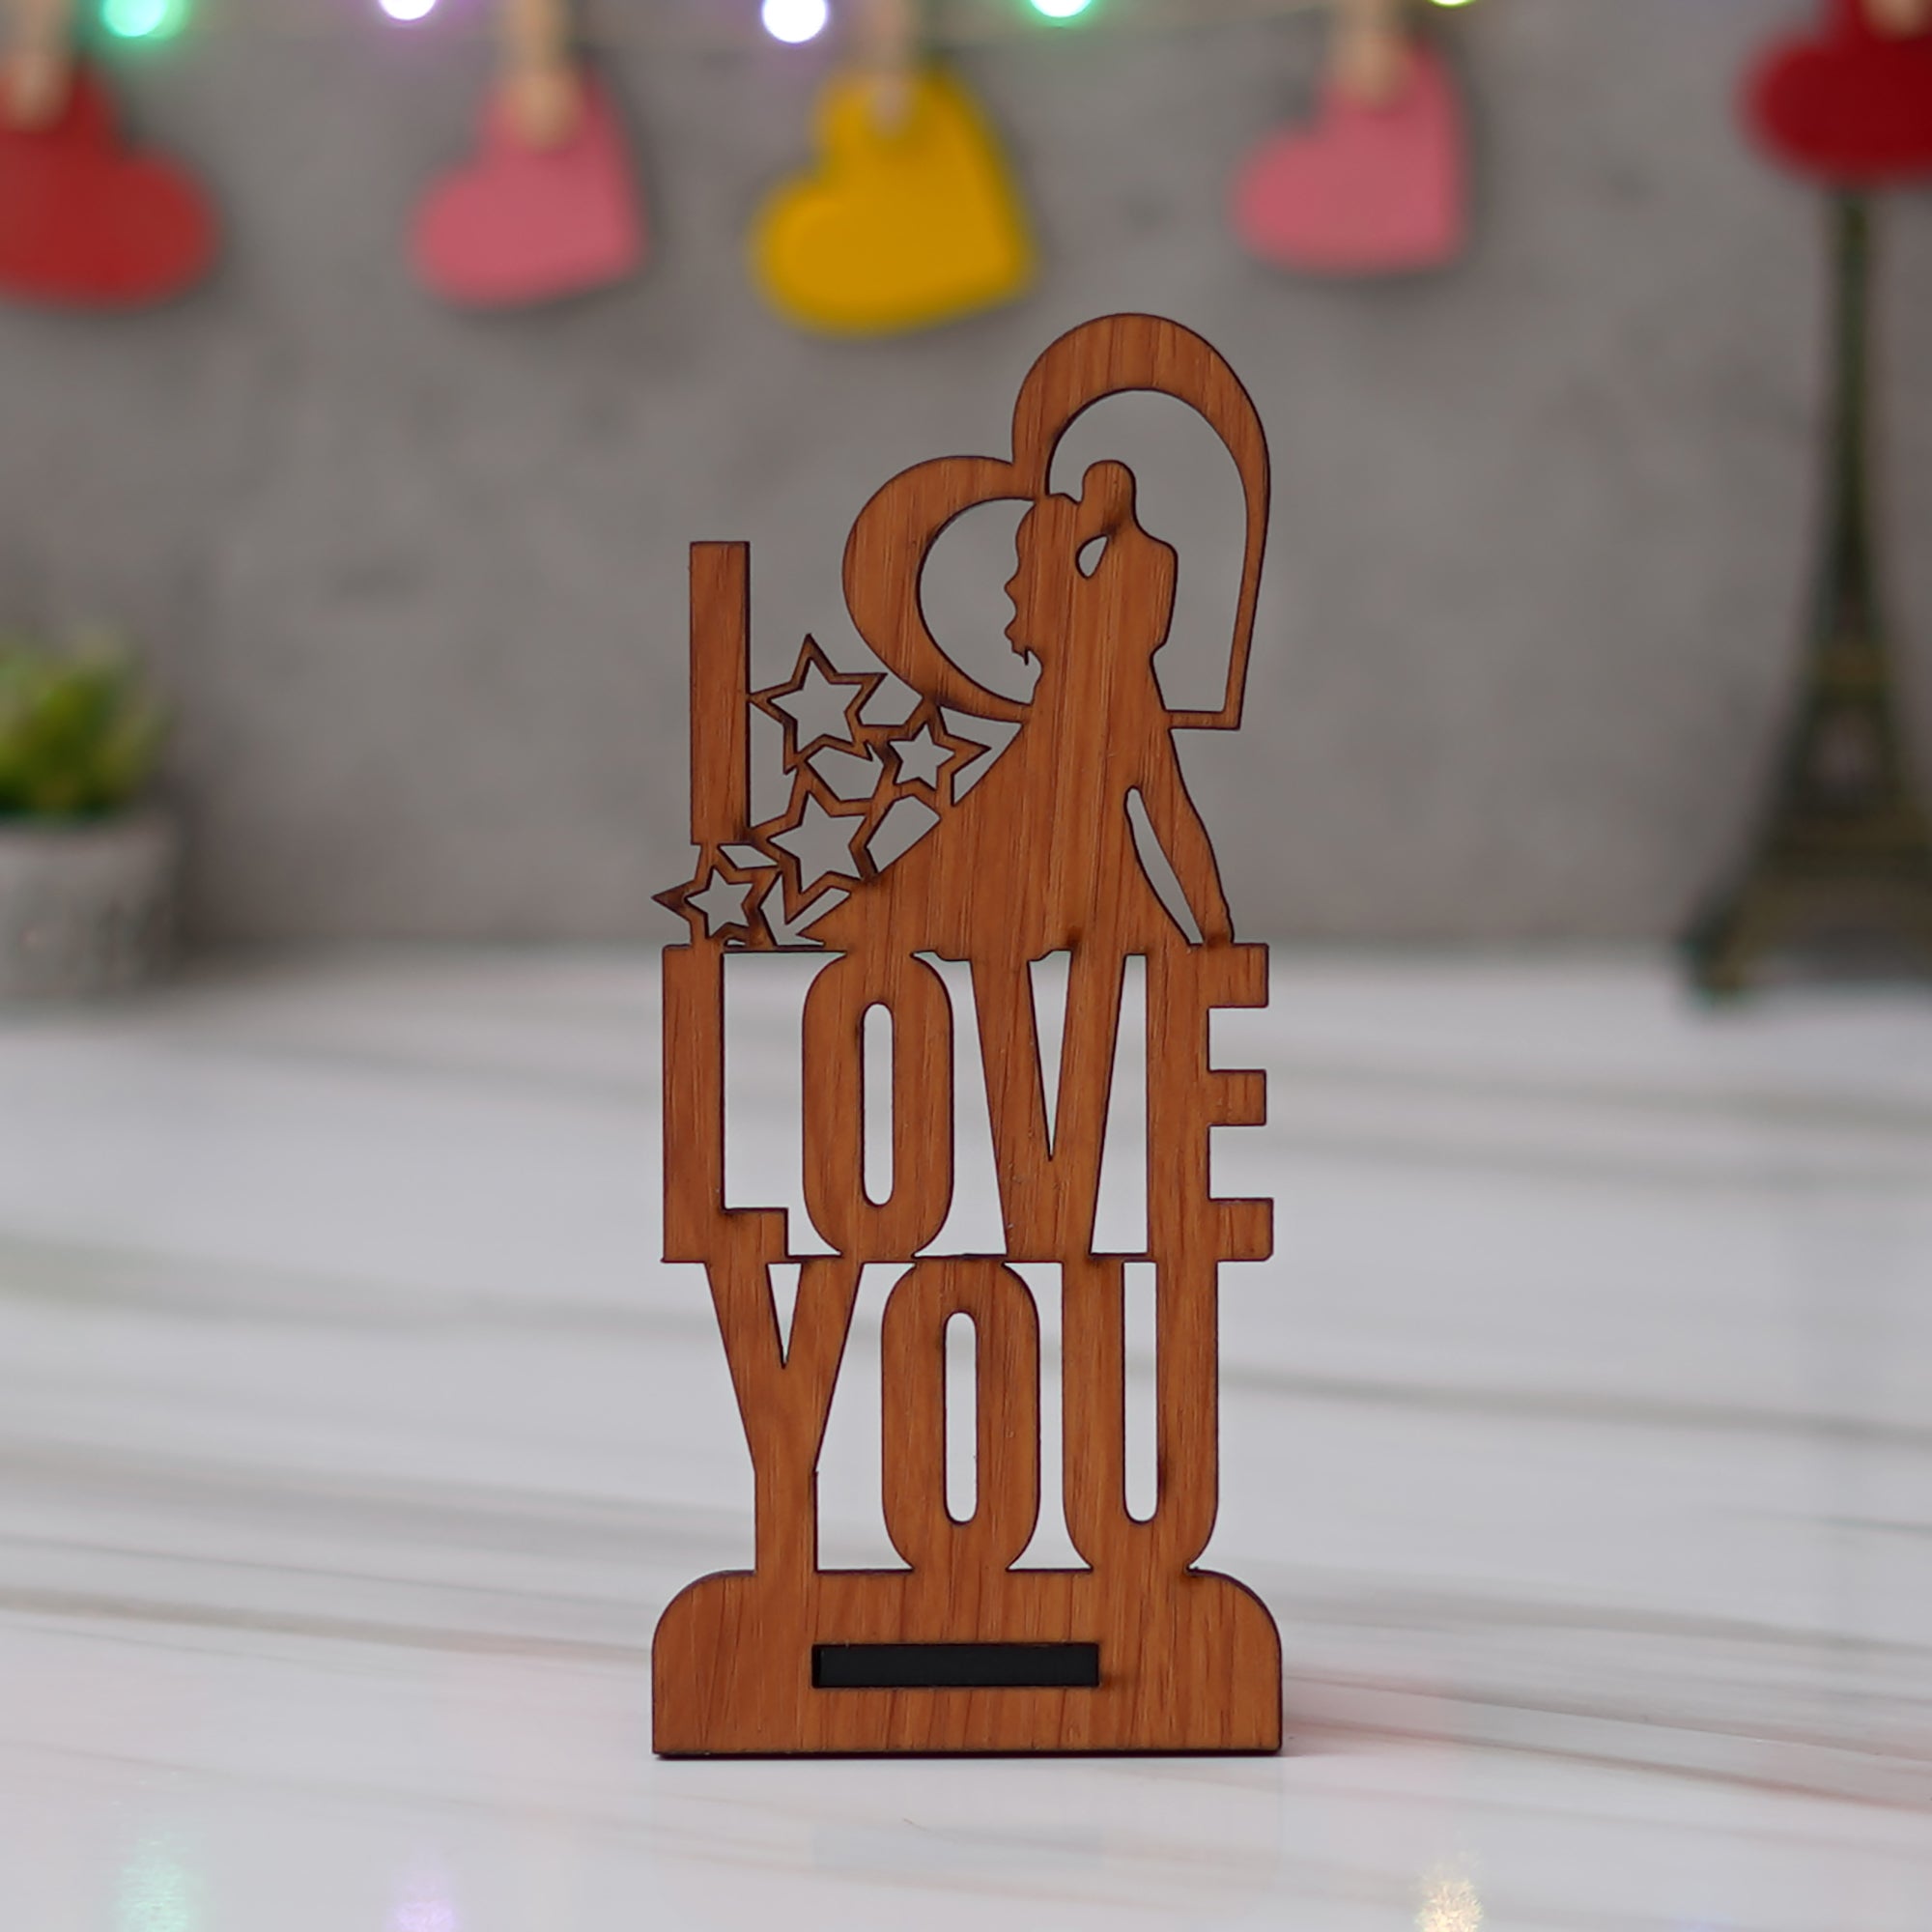 Valentine Combo of Set of 8 Love Post Cards Gift Cards Set, "Love You" Wooden Showpiece With Stand, Pink Heart Shaped Gift Box with Teddy and Roses 3